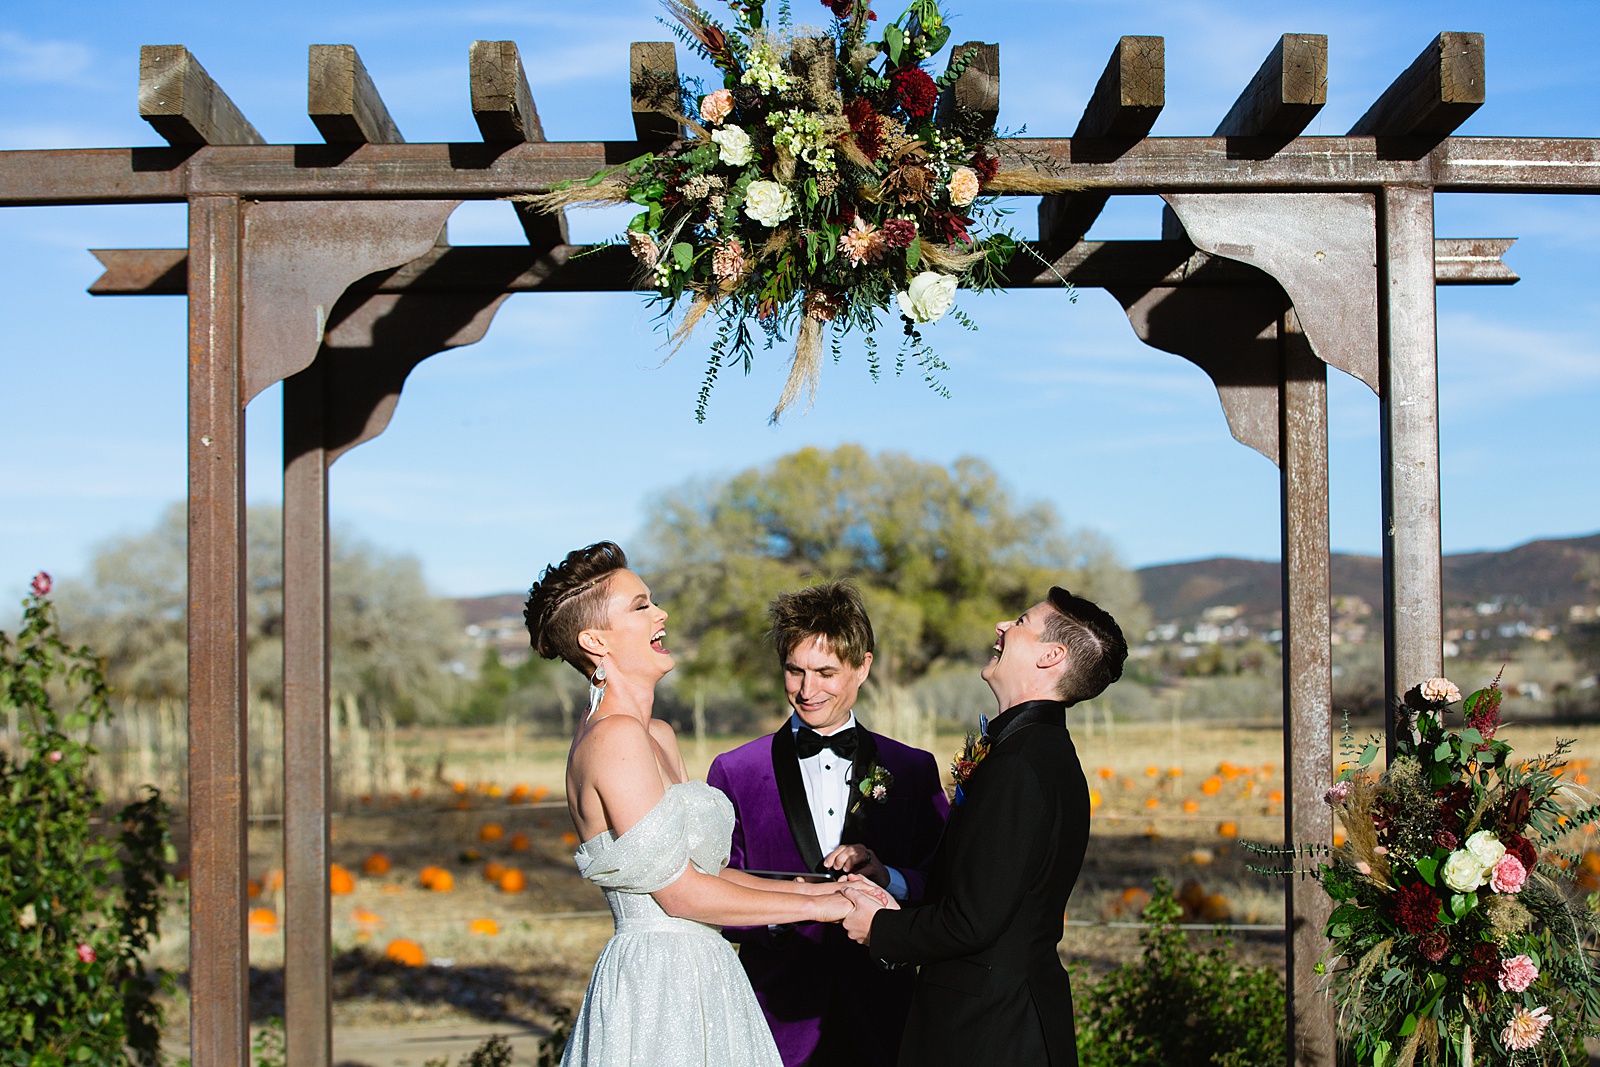 Same sex couple laughing together during their wedding ceremony at Mortimer Farms by Phoenix wedding photographer PMA Photography.